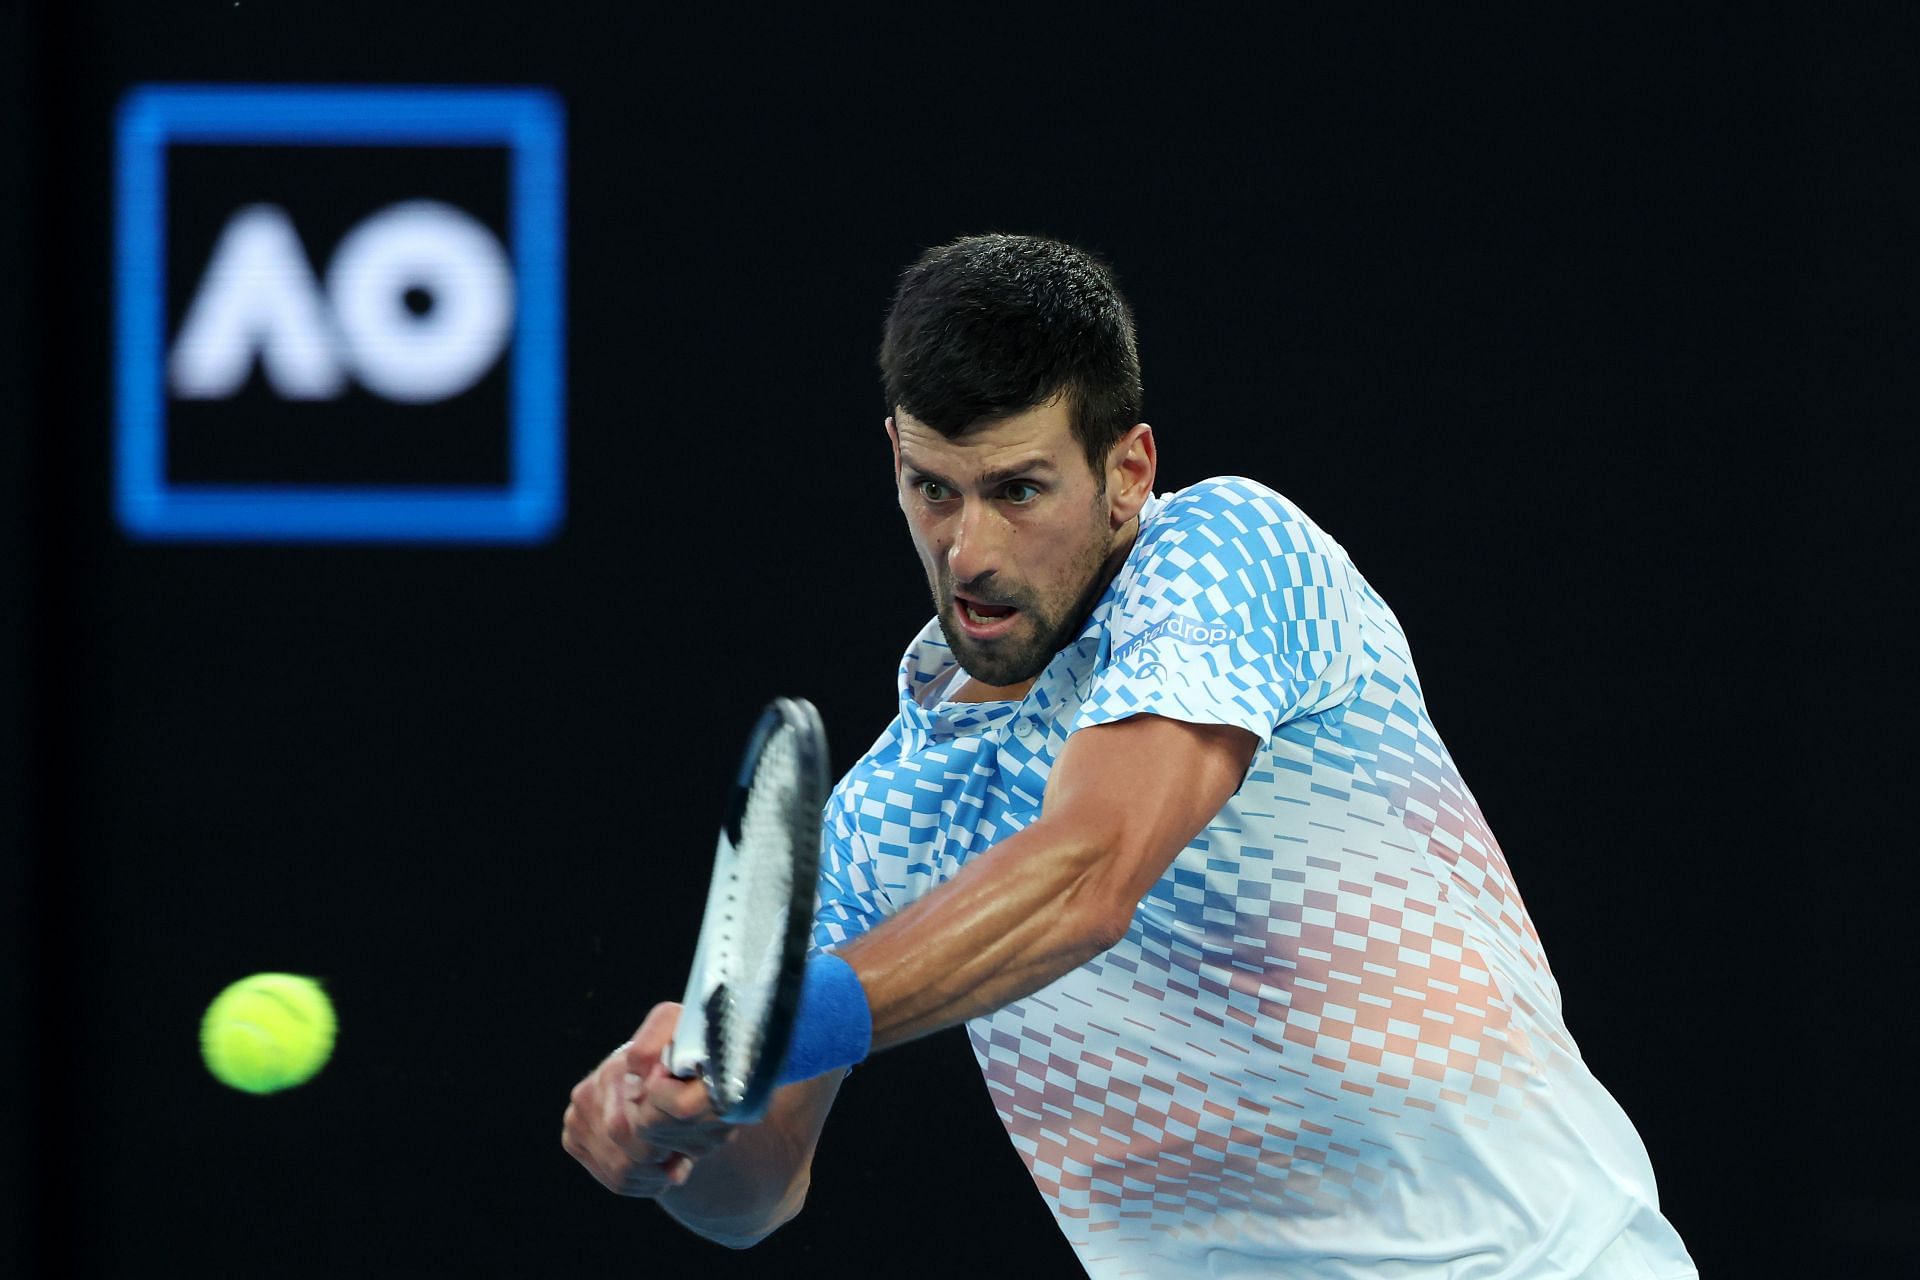 Novak Djokovic plays a backhand in the Quarterfinal singles match against Andrey Rublev